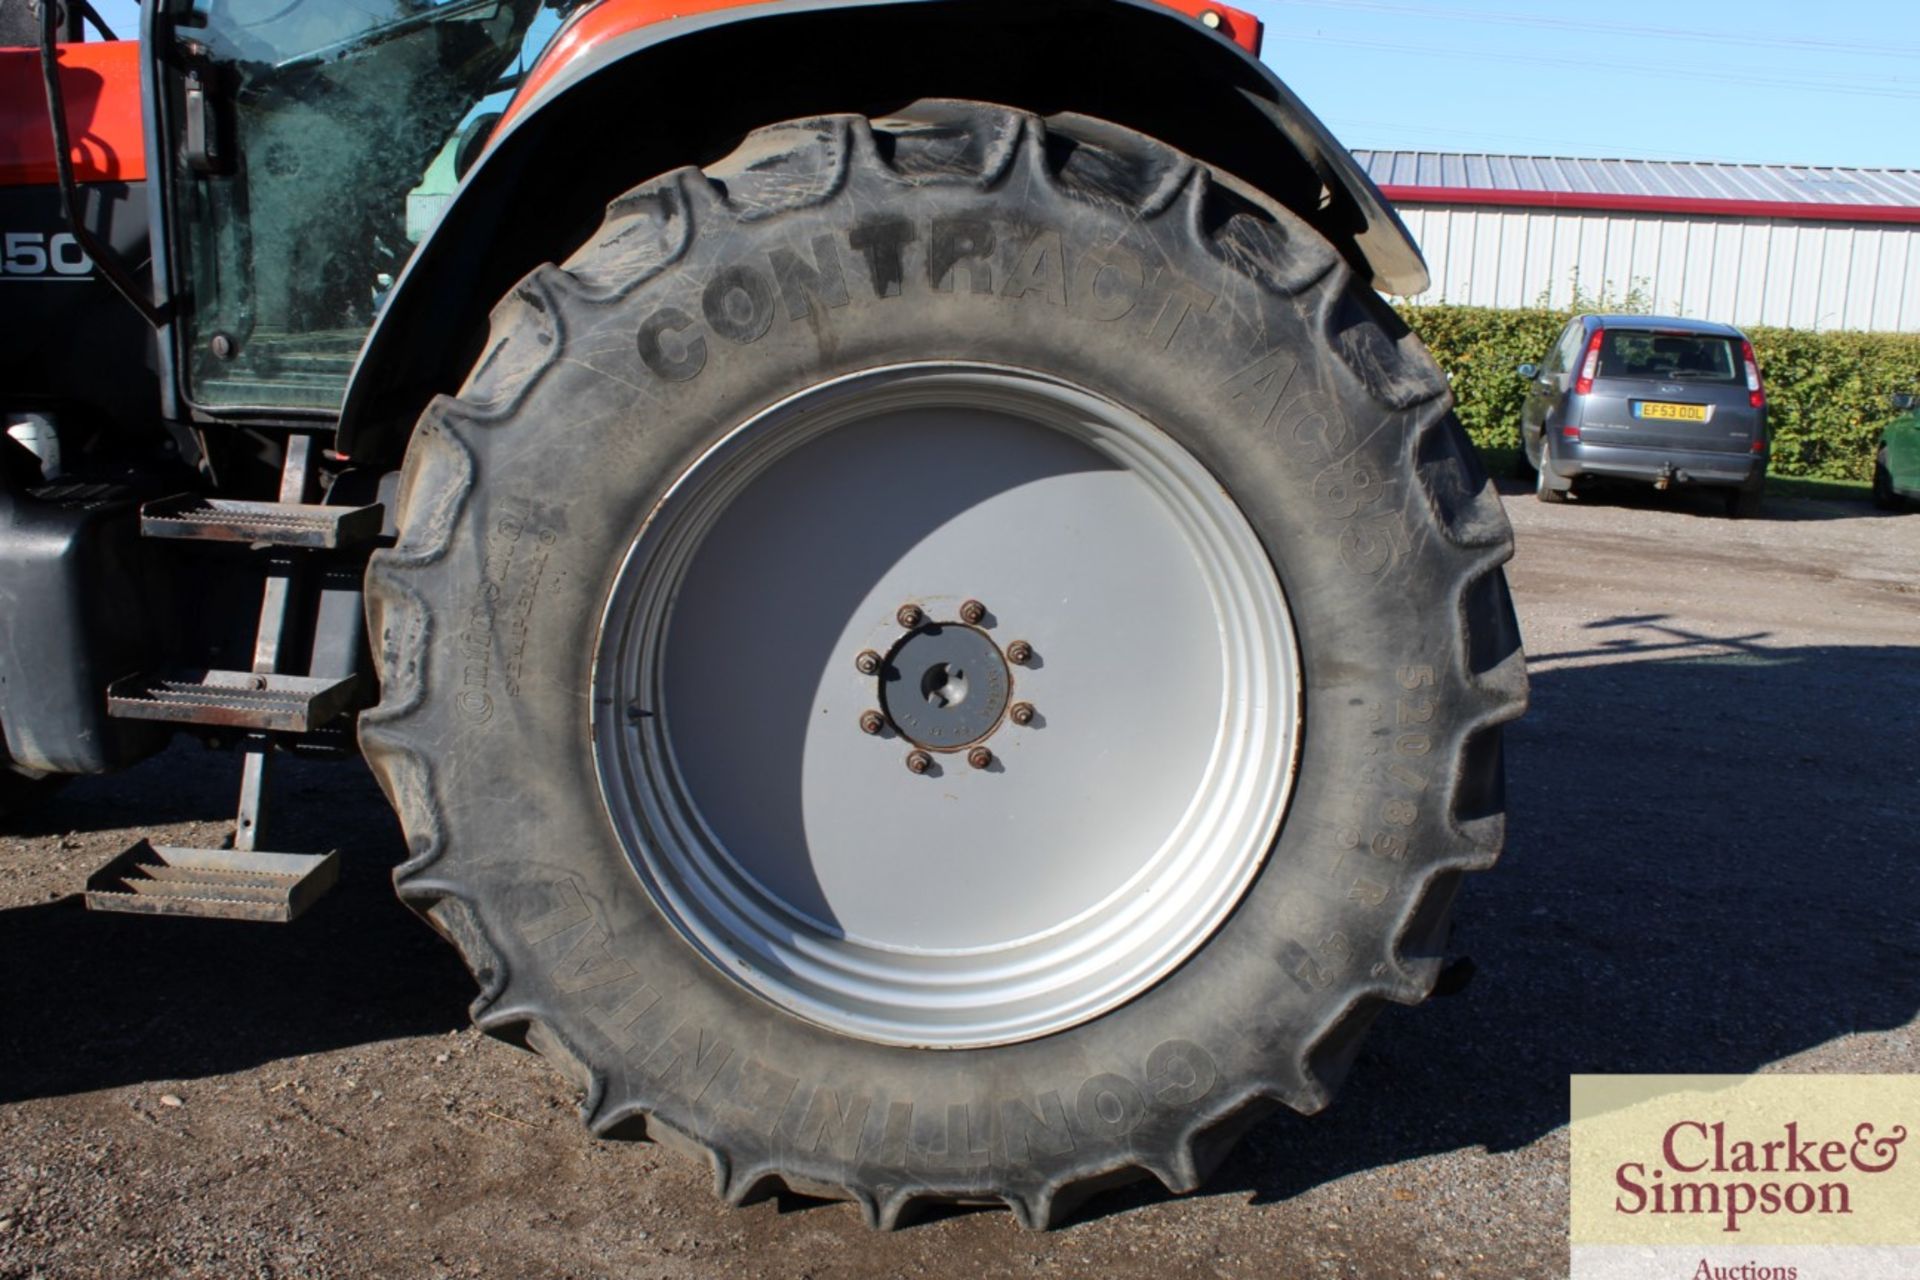 New Holland TM150 4WD tractor. 28/10/2000. 11,839 hours. 520/85R42 rear wheels and tyres @ 60%. - Image 20 of 58